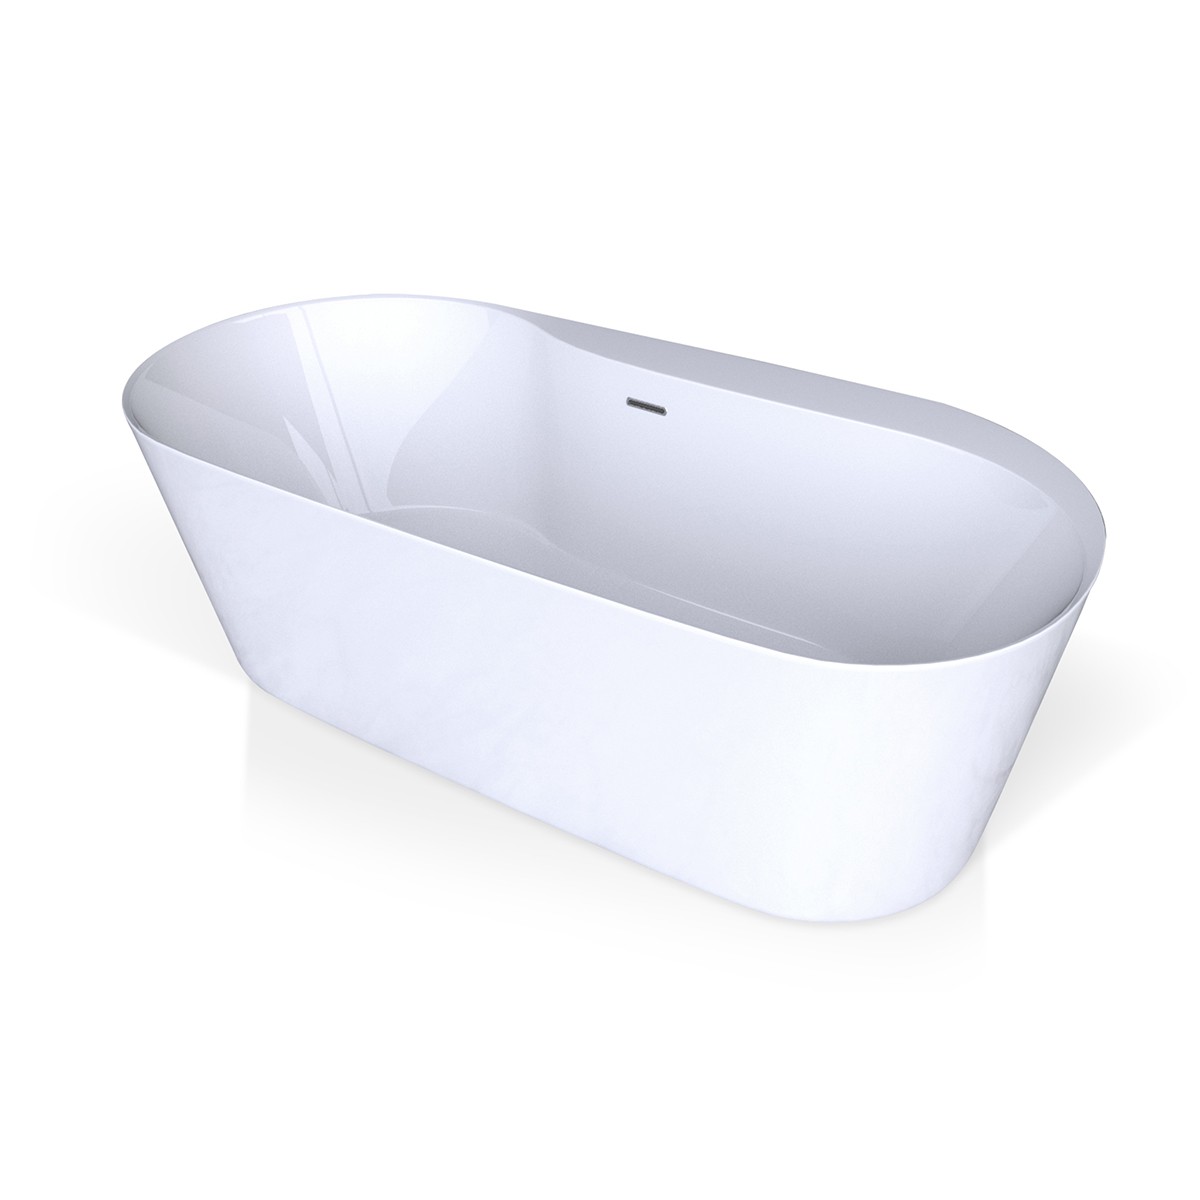 VALLEY ACRYLIC LAVISH VA1082WHT AFFORDABLE LUXURY 70 INCH CONTEMPORARY OVAL WITH DECK FREESTANDING ACRYLIC INSULATED BATHTUB - WHITE